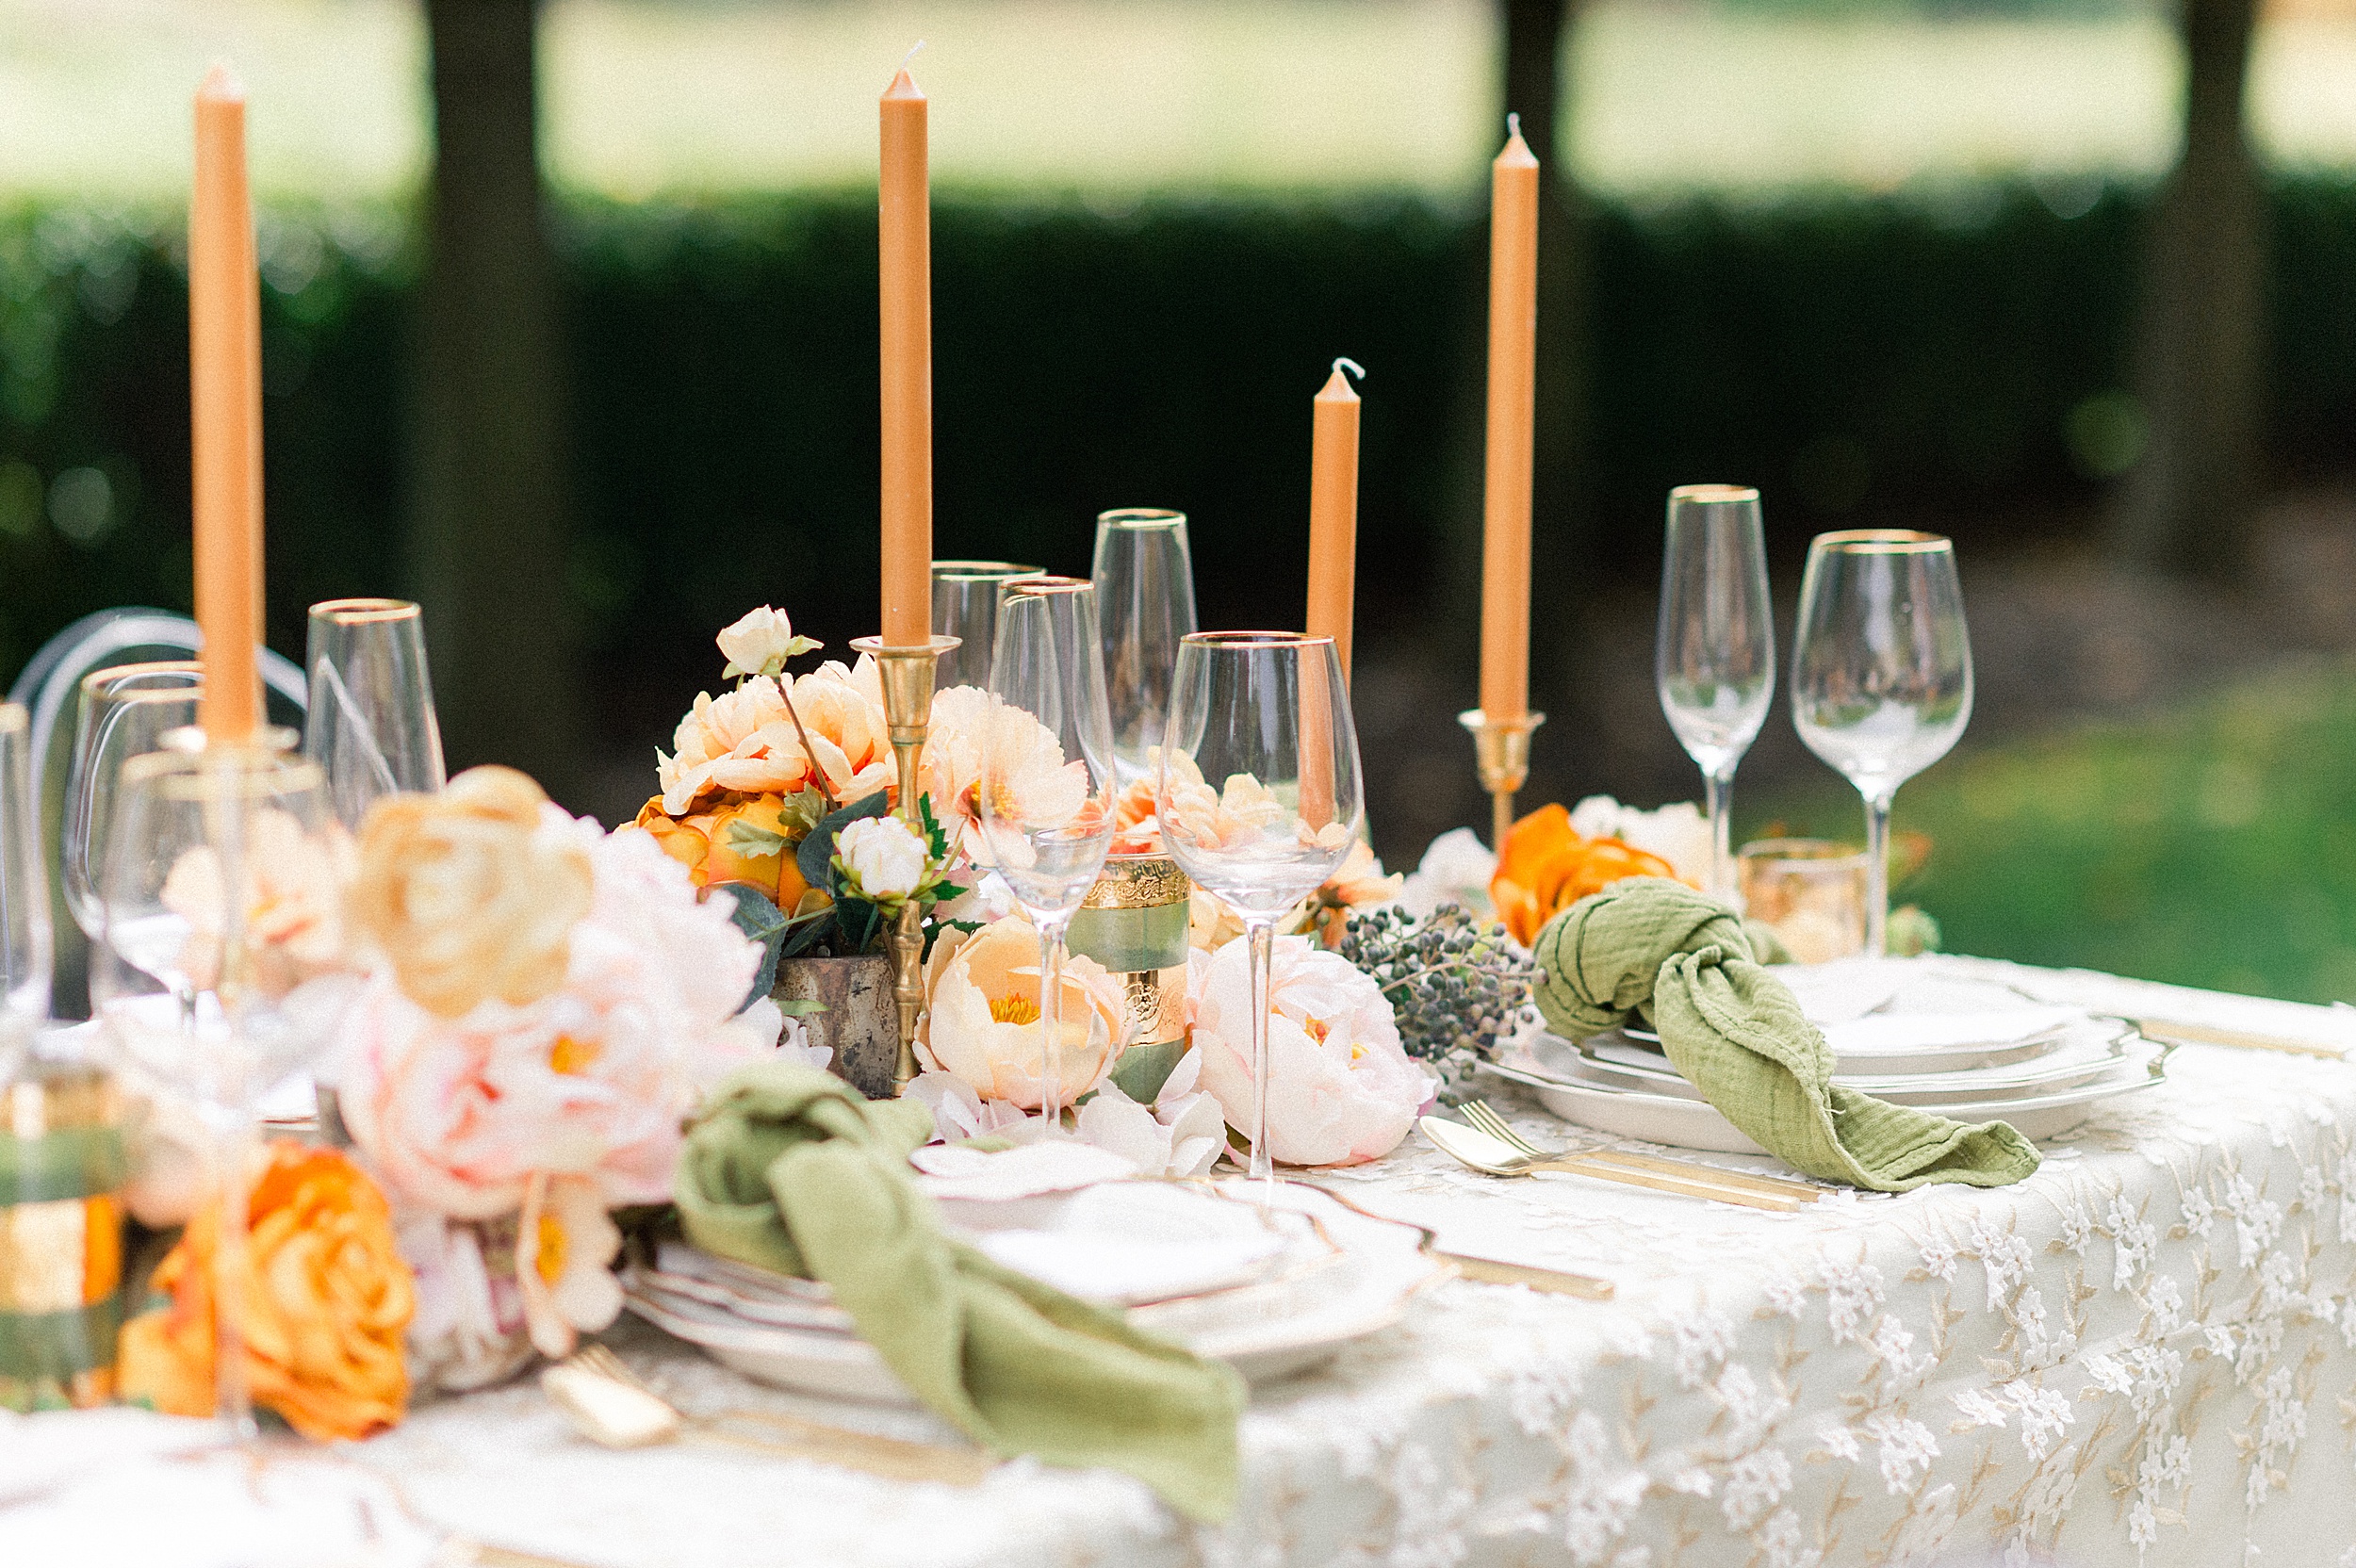 Wedding inspiration at The Mount in Lenox MA with lace overlay, and lush tablescape